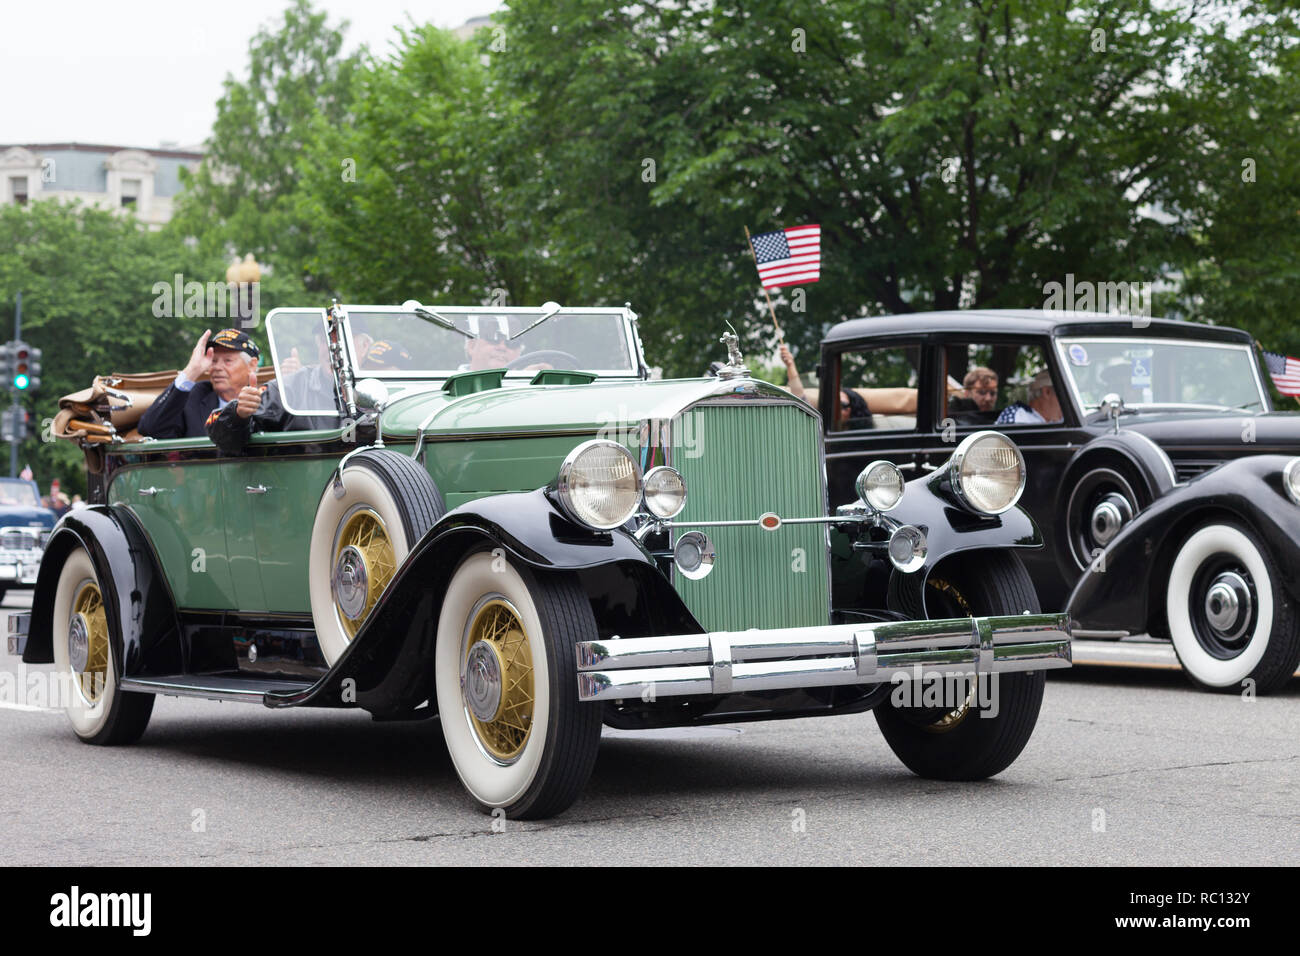 Washington, D.C., USA - May 28, 2018: The National Memorial Day Parade, a Pierce Arrow Classic car with Military veterans, going down Constitution Ave Stock Photo